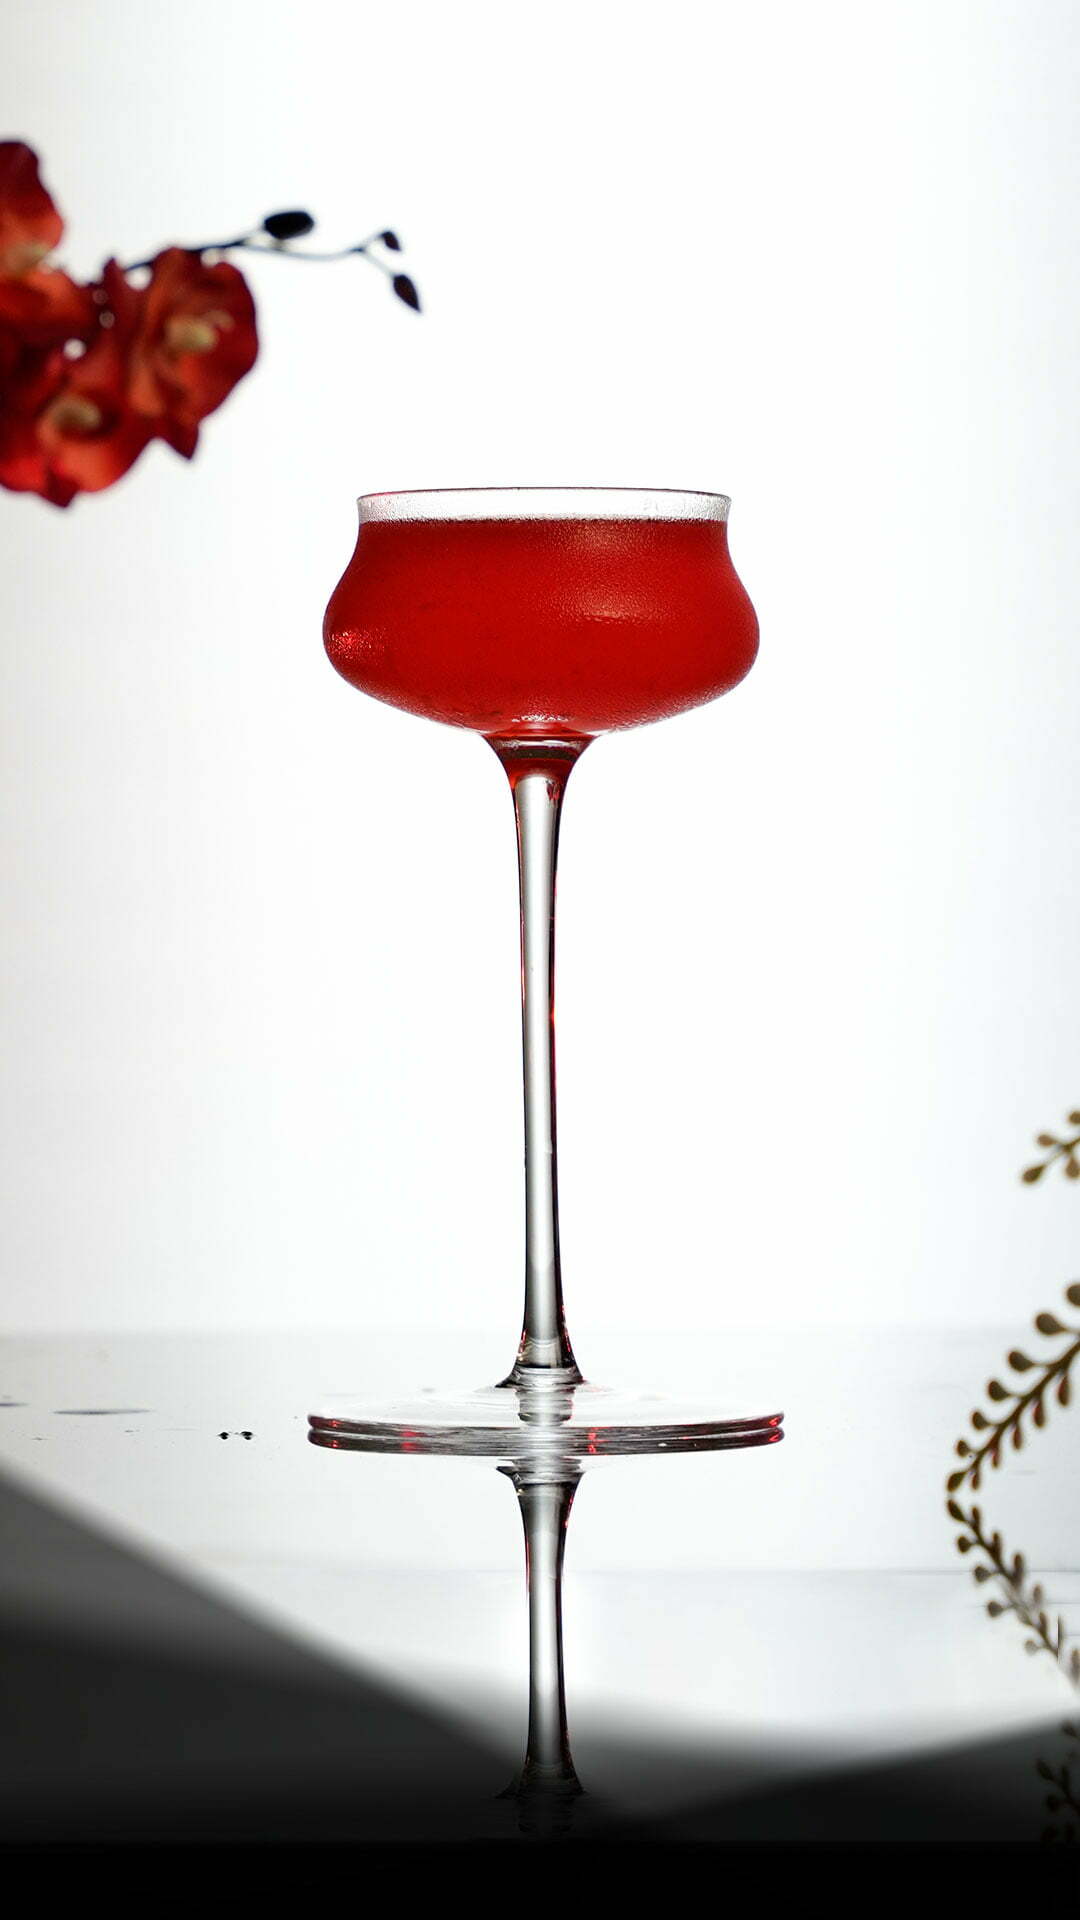 Red Cocktail inside a Tall Stemmed Coupe Glass